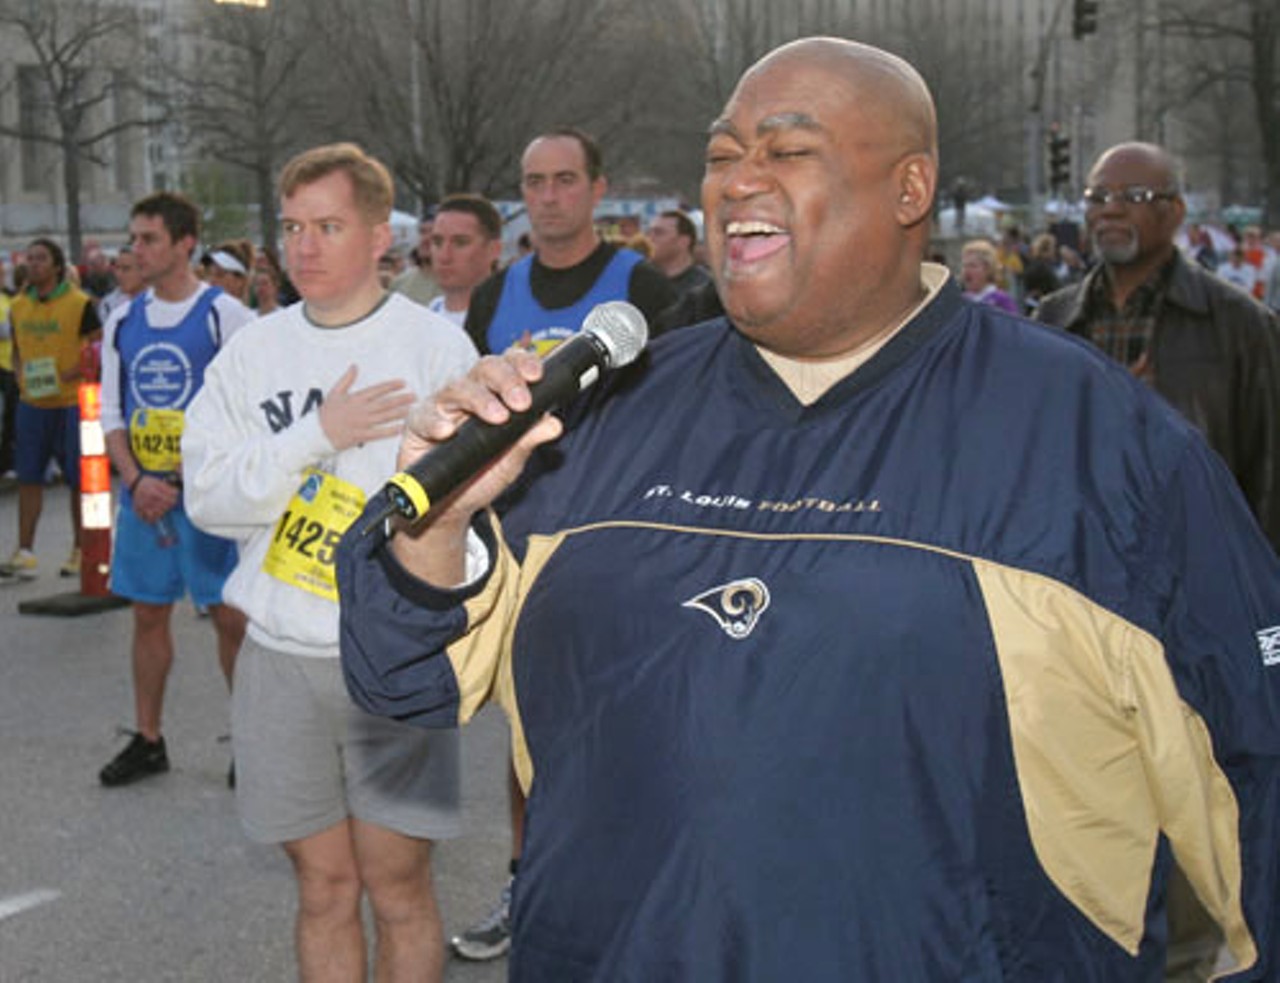 Charles Glenn sings the National Anthem to kick off the Go! St. Louis Marathon. Glenn also occasionally performs the National Anthem at St. Louis Blues, Rams, and Cardinals games.